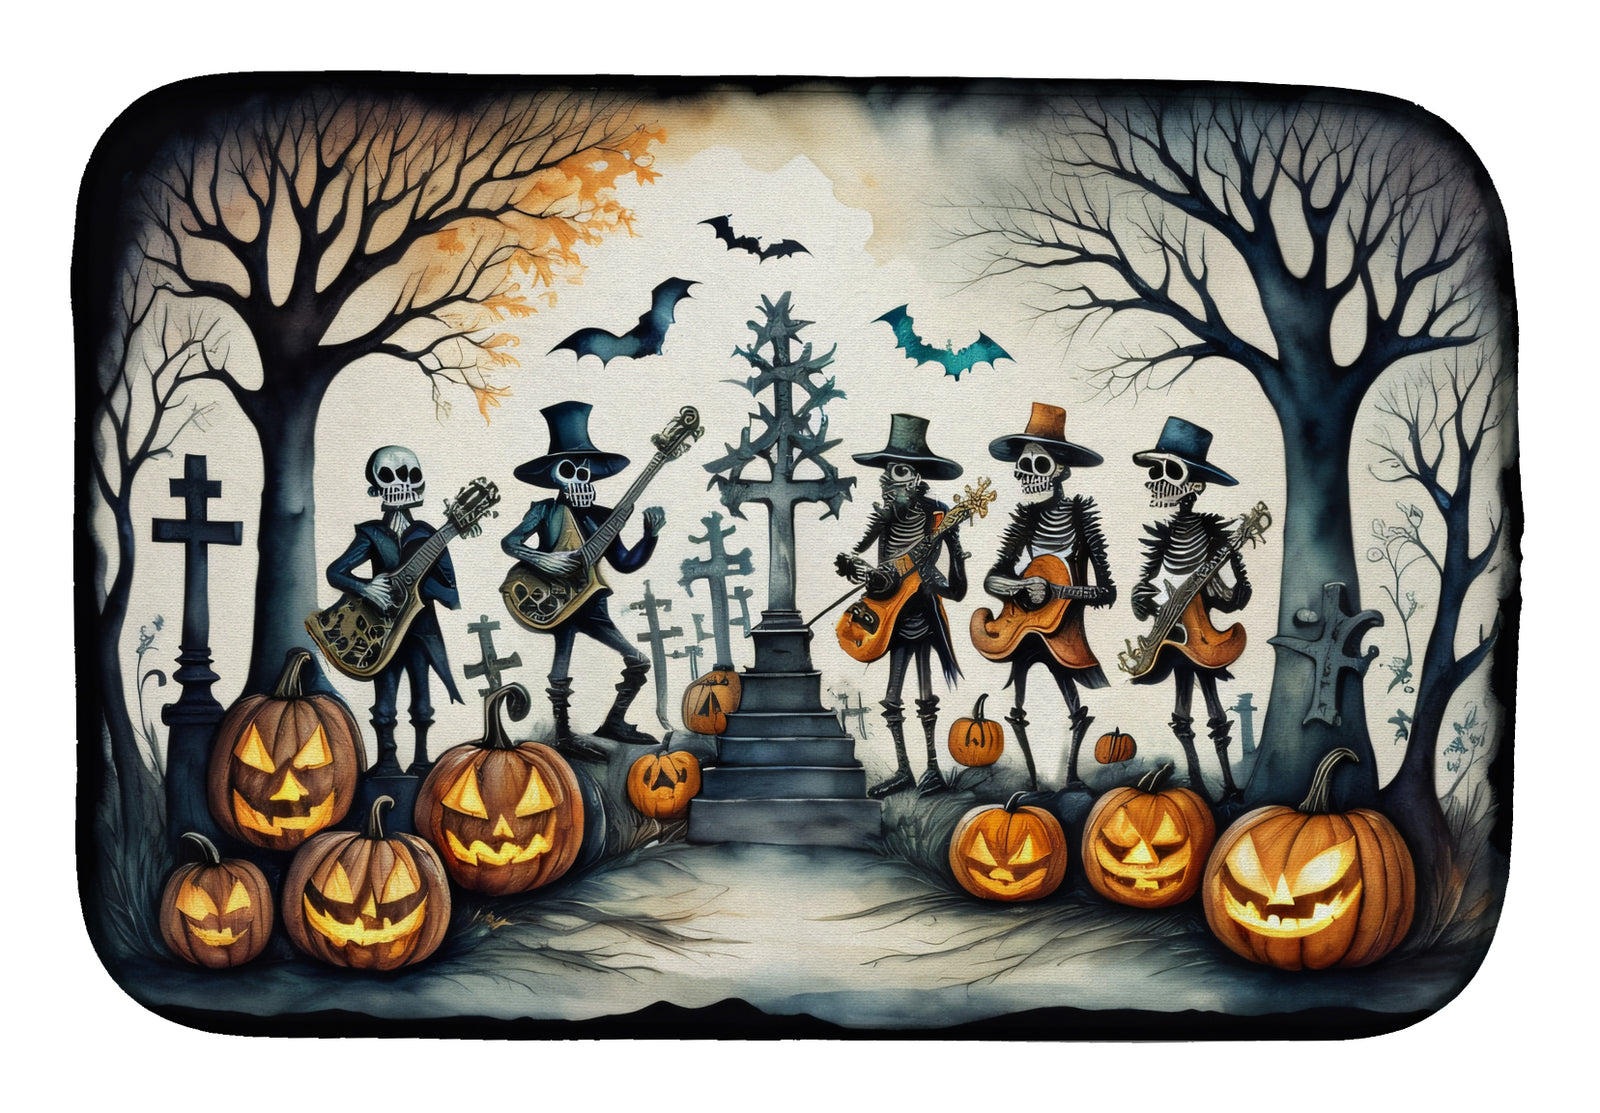 Buy this Mariachi Skeleton Band Spooky Halloween Dish Drying Mat